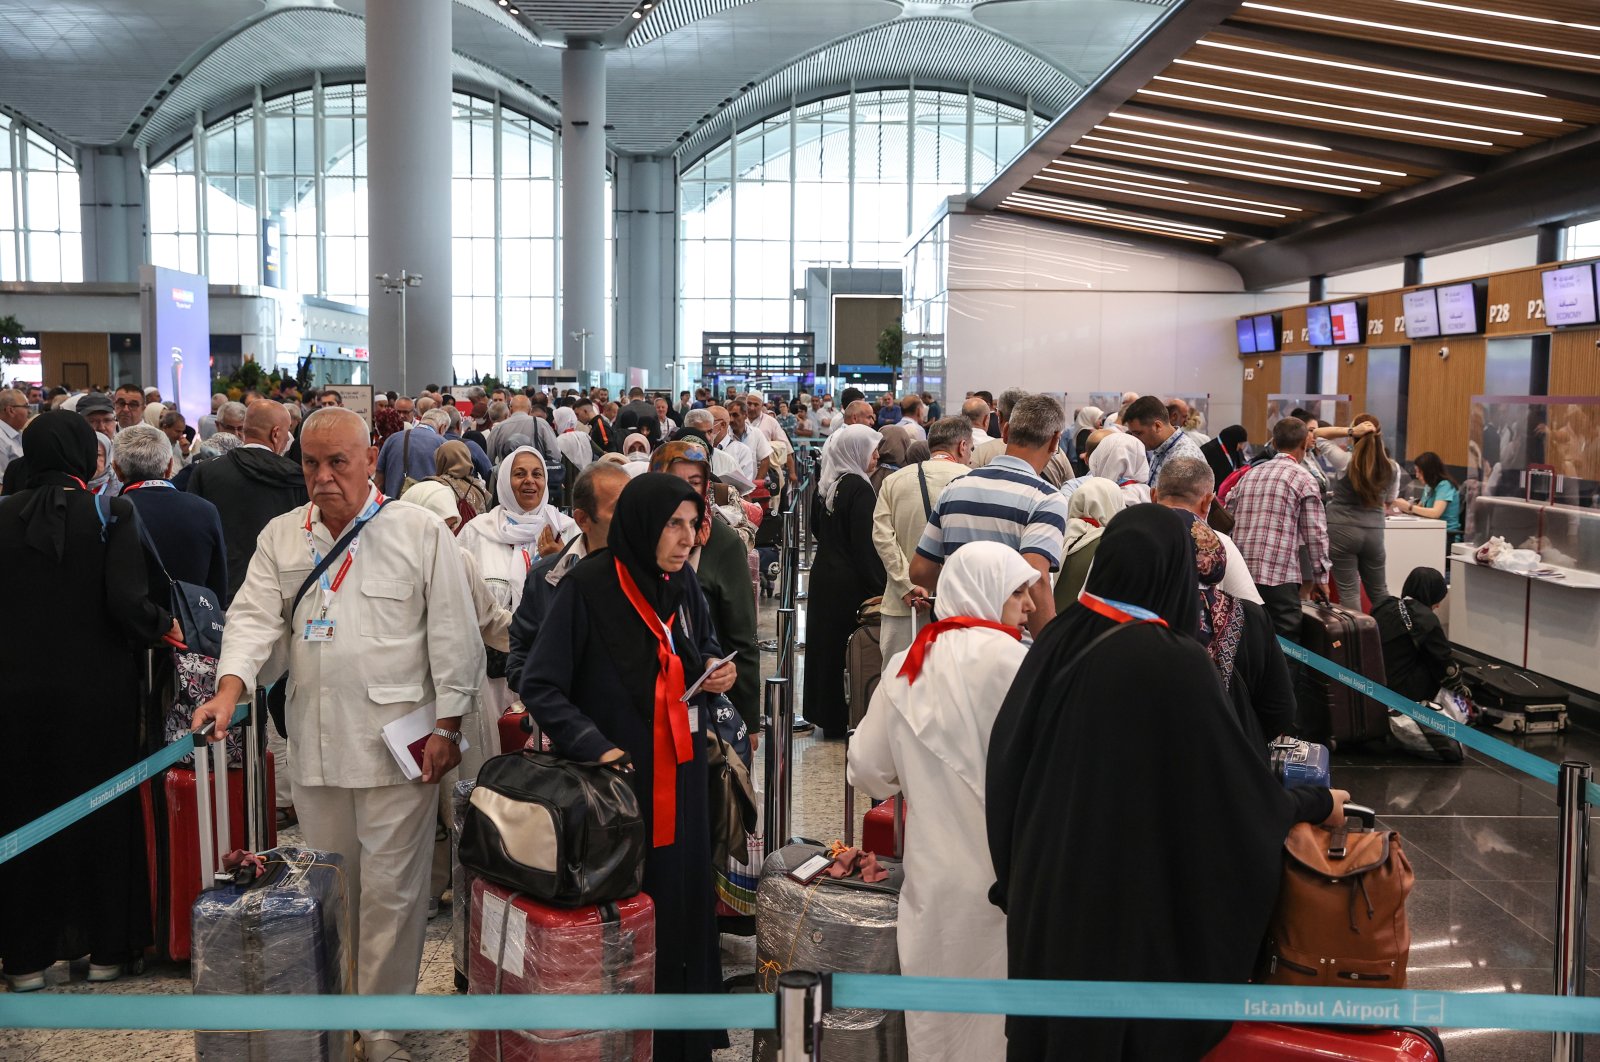 Prospective pilgrims wait to board their flight at the airport, in Istanbul, Turkey, June 7, 2022. (AA PHOTO)